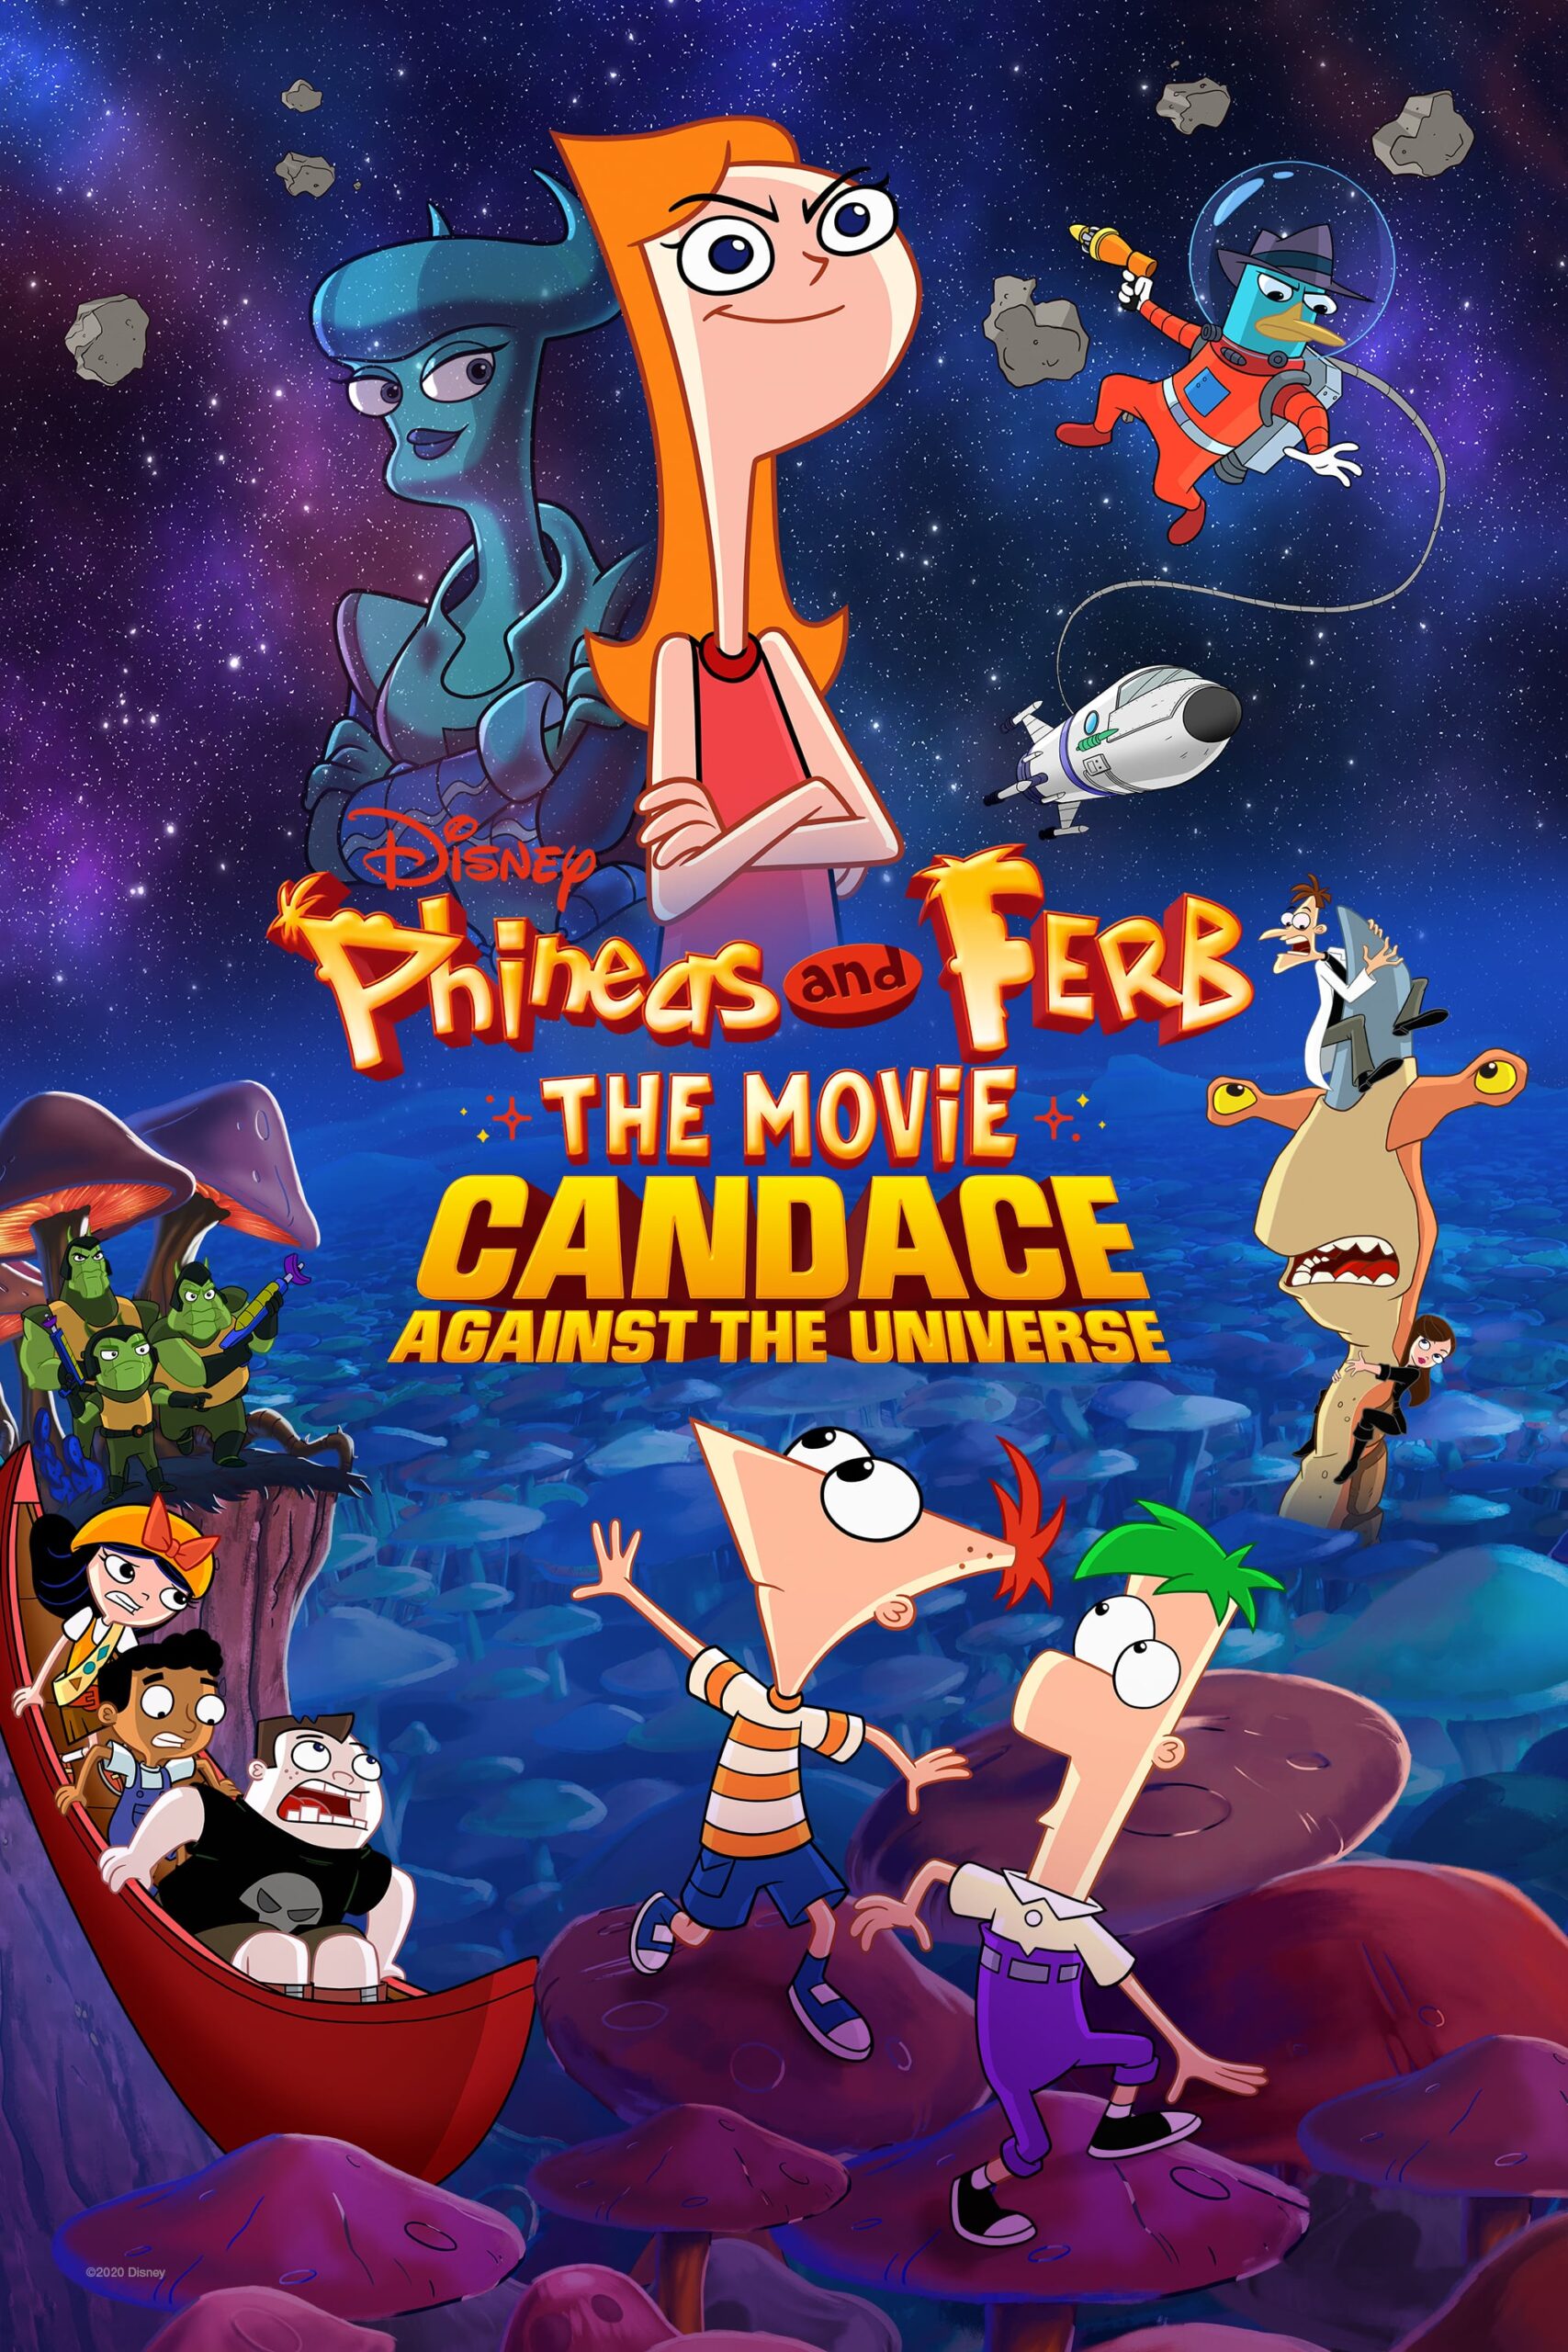 Ep151 – Phineas and Ferb the Movie: Candace Against the Universe – Best Movies of 2020